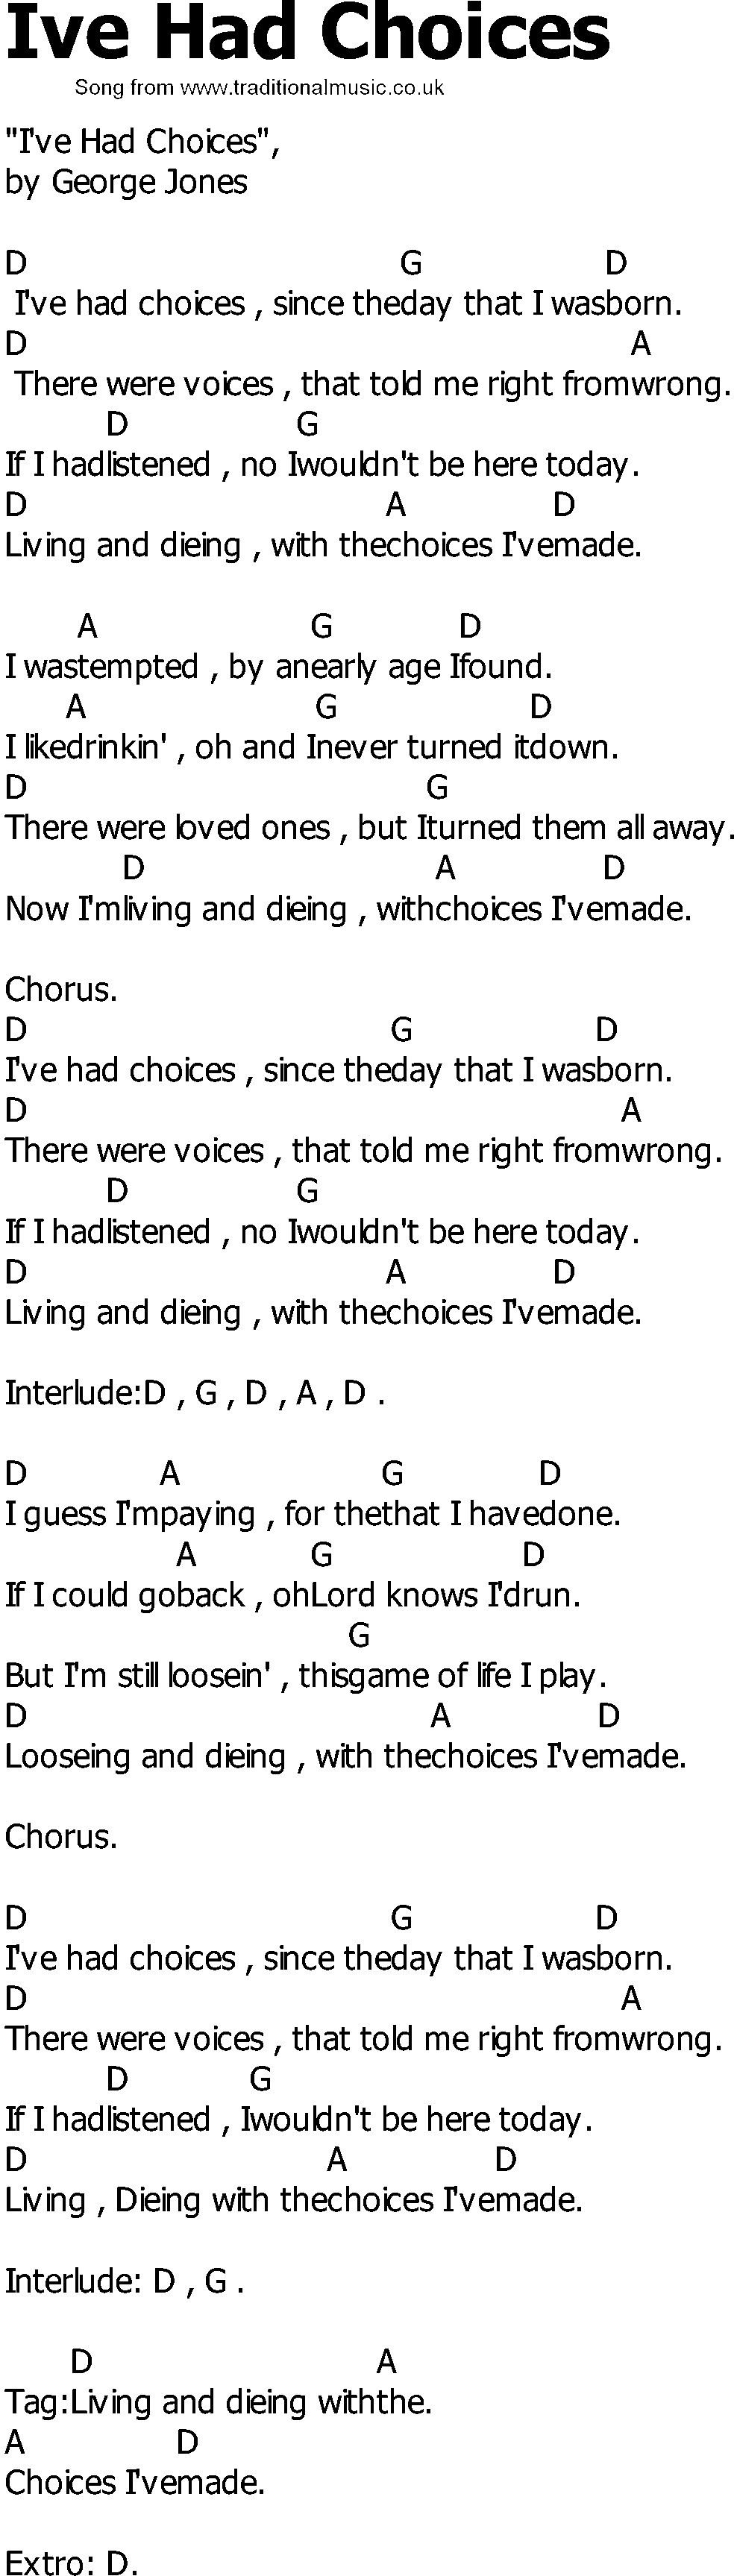 Old Country song lyrics with chords Ive Had Choices